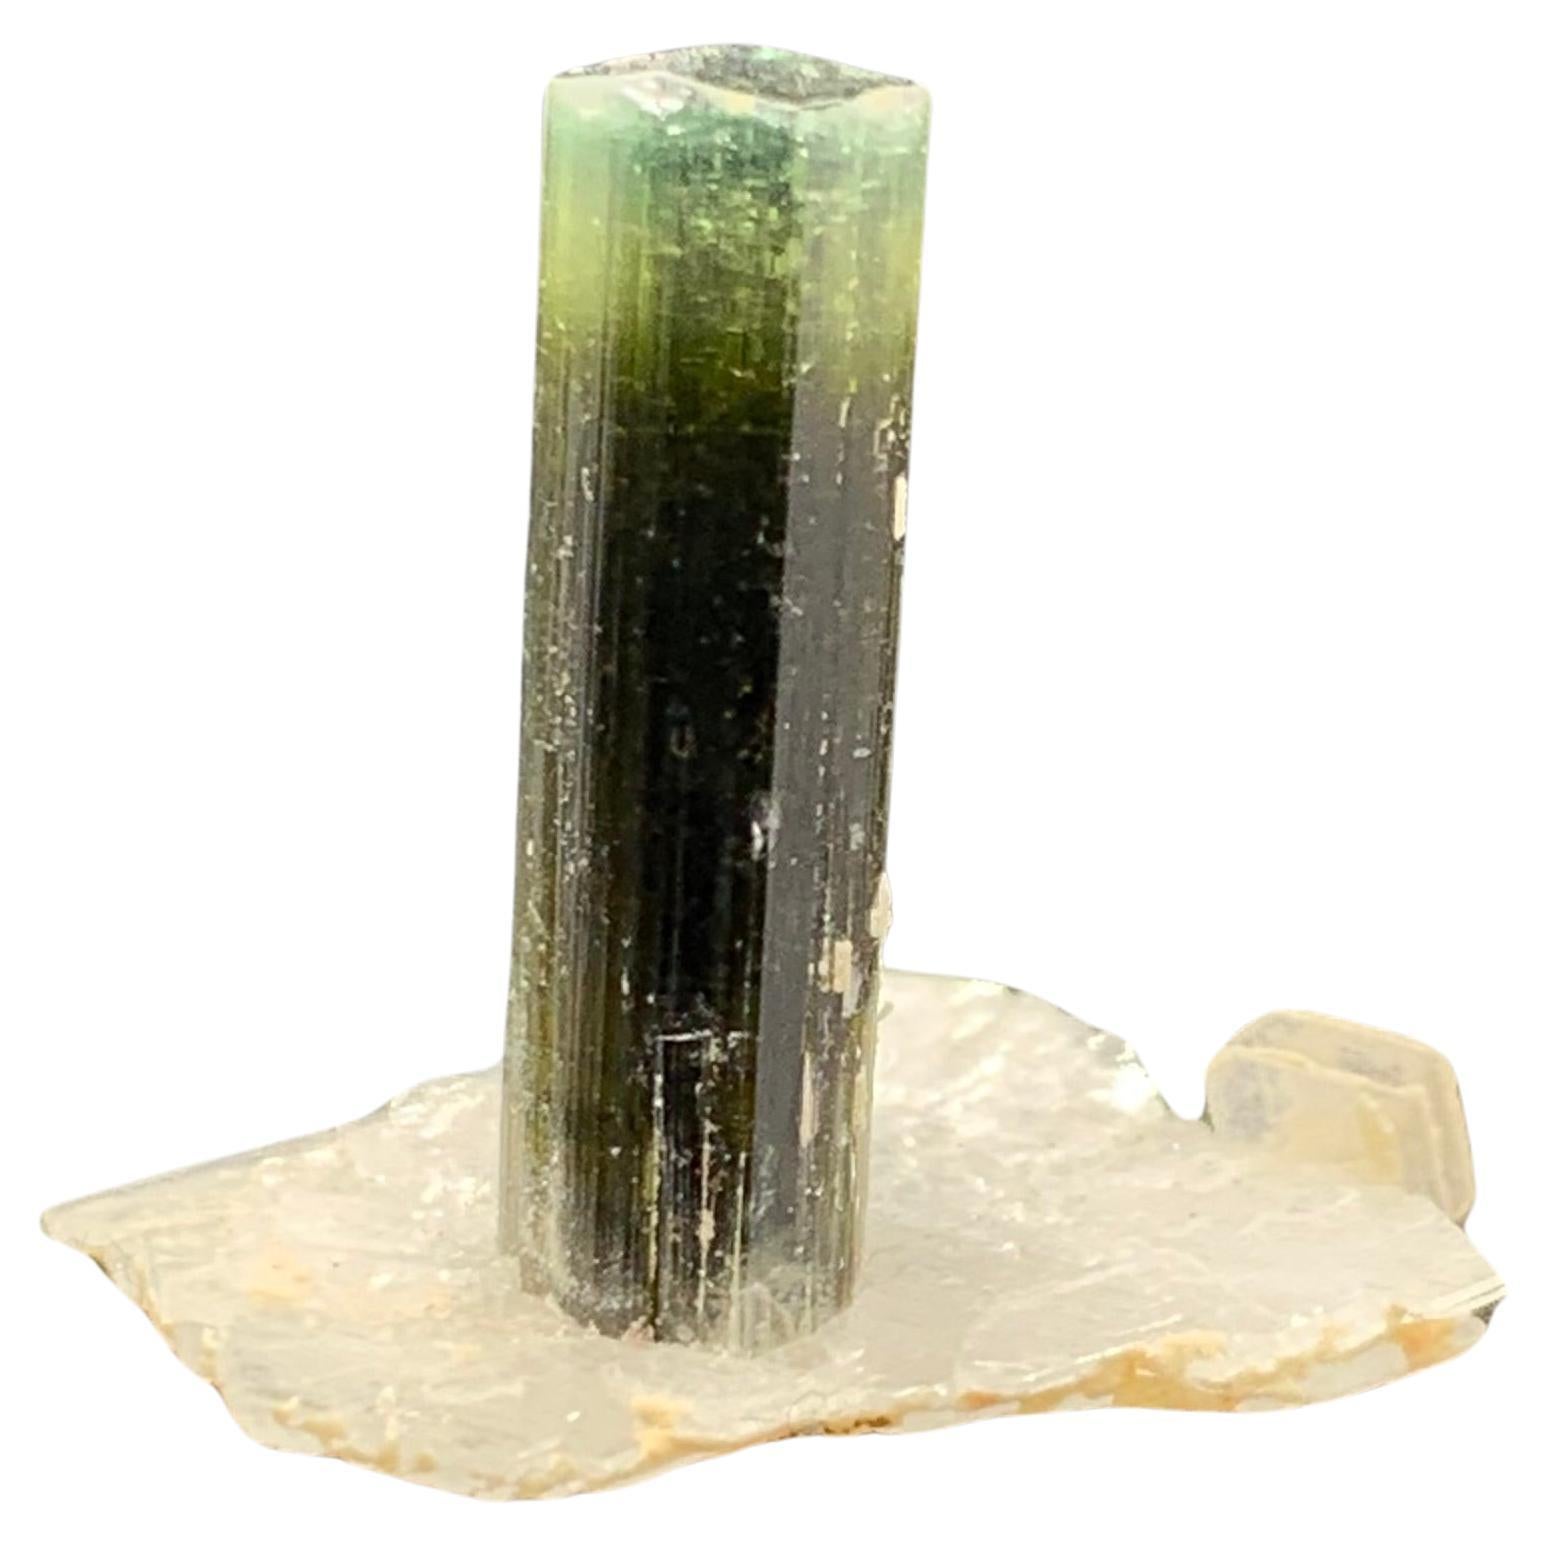 2.56 Grammes Elegant Tourmaline Crystal Attached With Albite From Pakistan  en vente